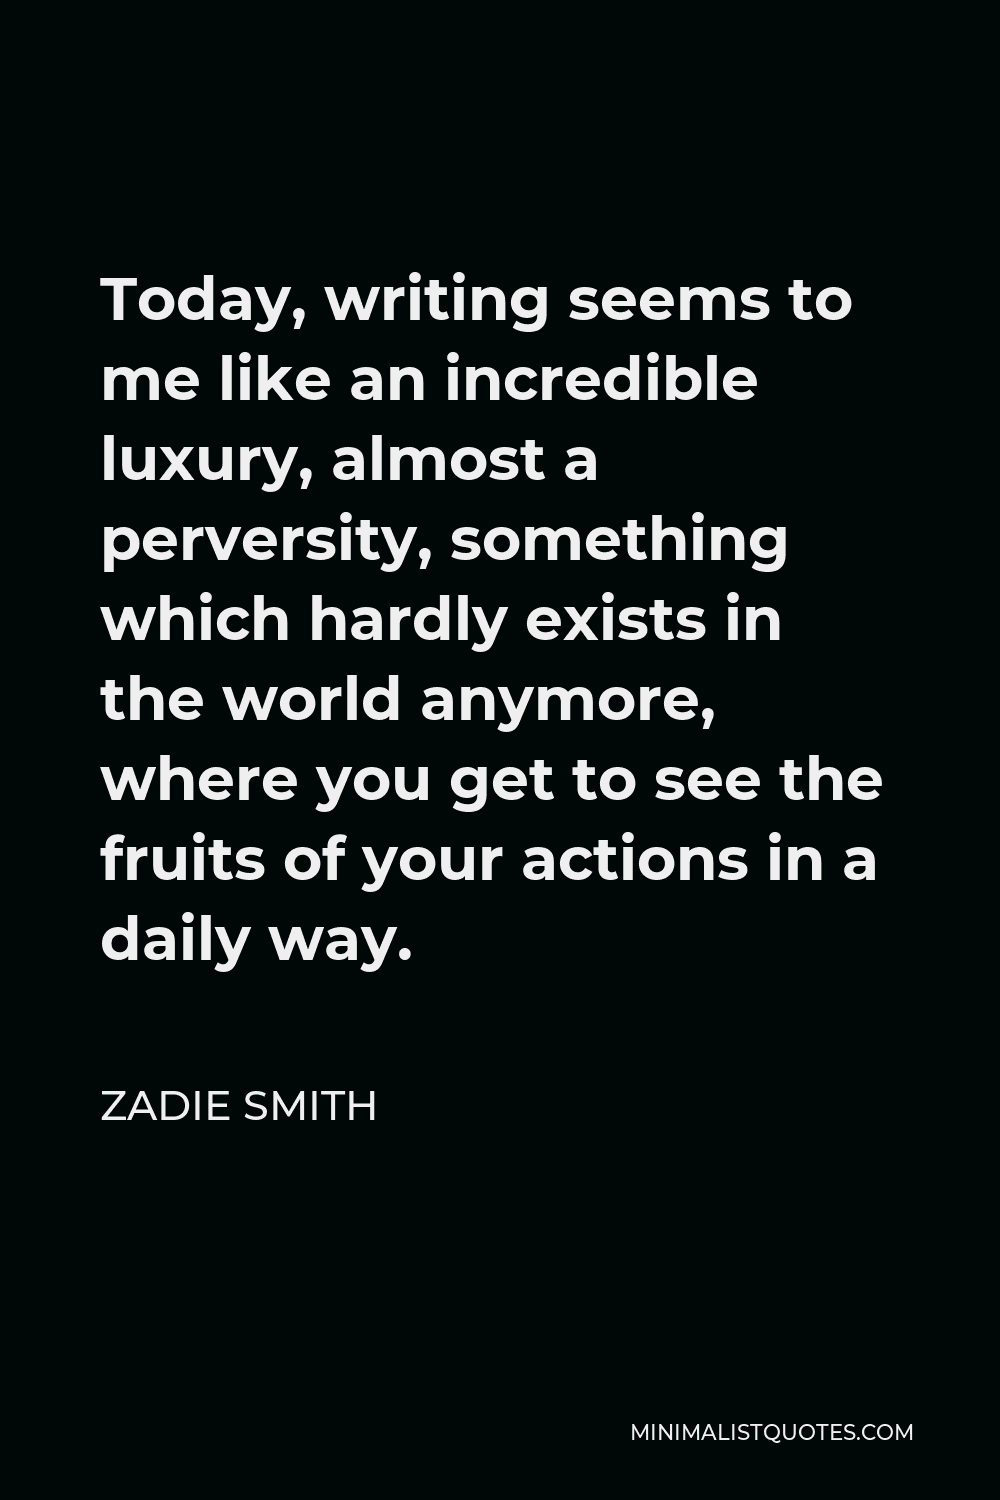 Zadie Smith Quote - Today, writing seems to me like an incredible luxury, almost a perversity, something which hardly exists in the world anymore, where you get to see the fruits of your actions in a daily way.